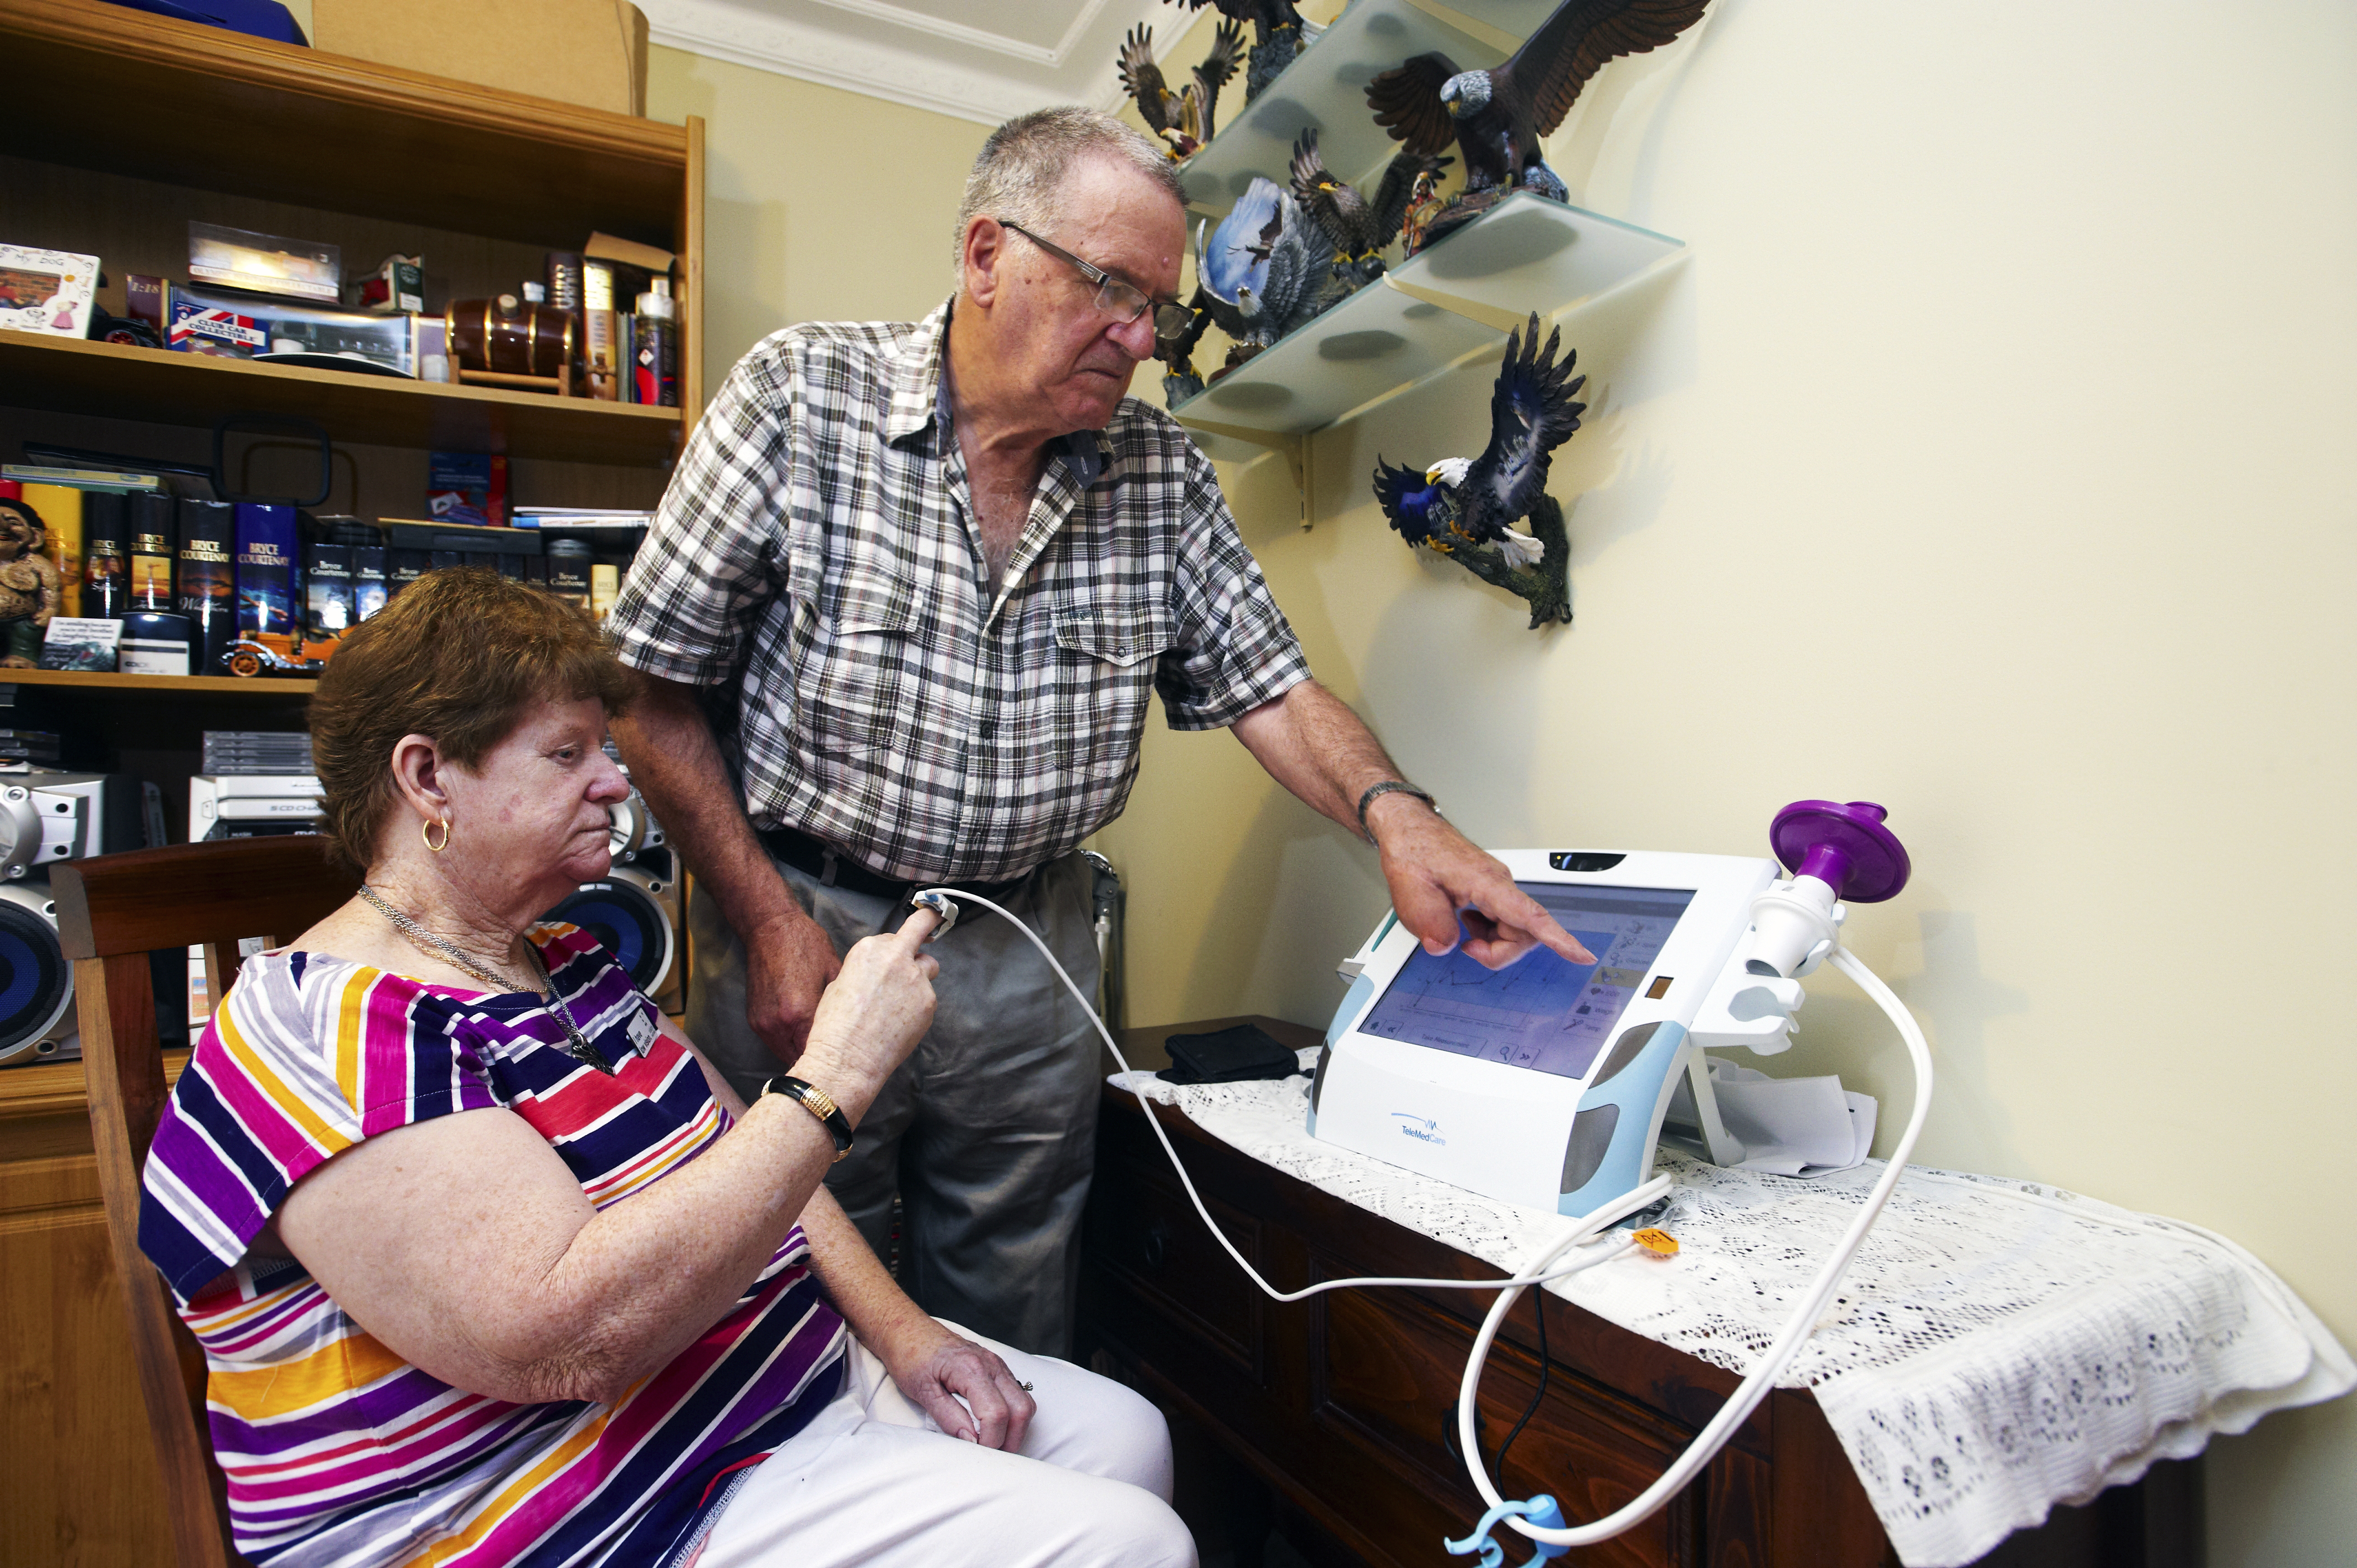 Bill helps Janice record her blood oxygen levels using the telehealth home monitoring system.